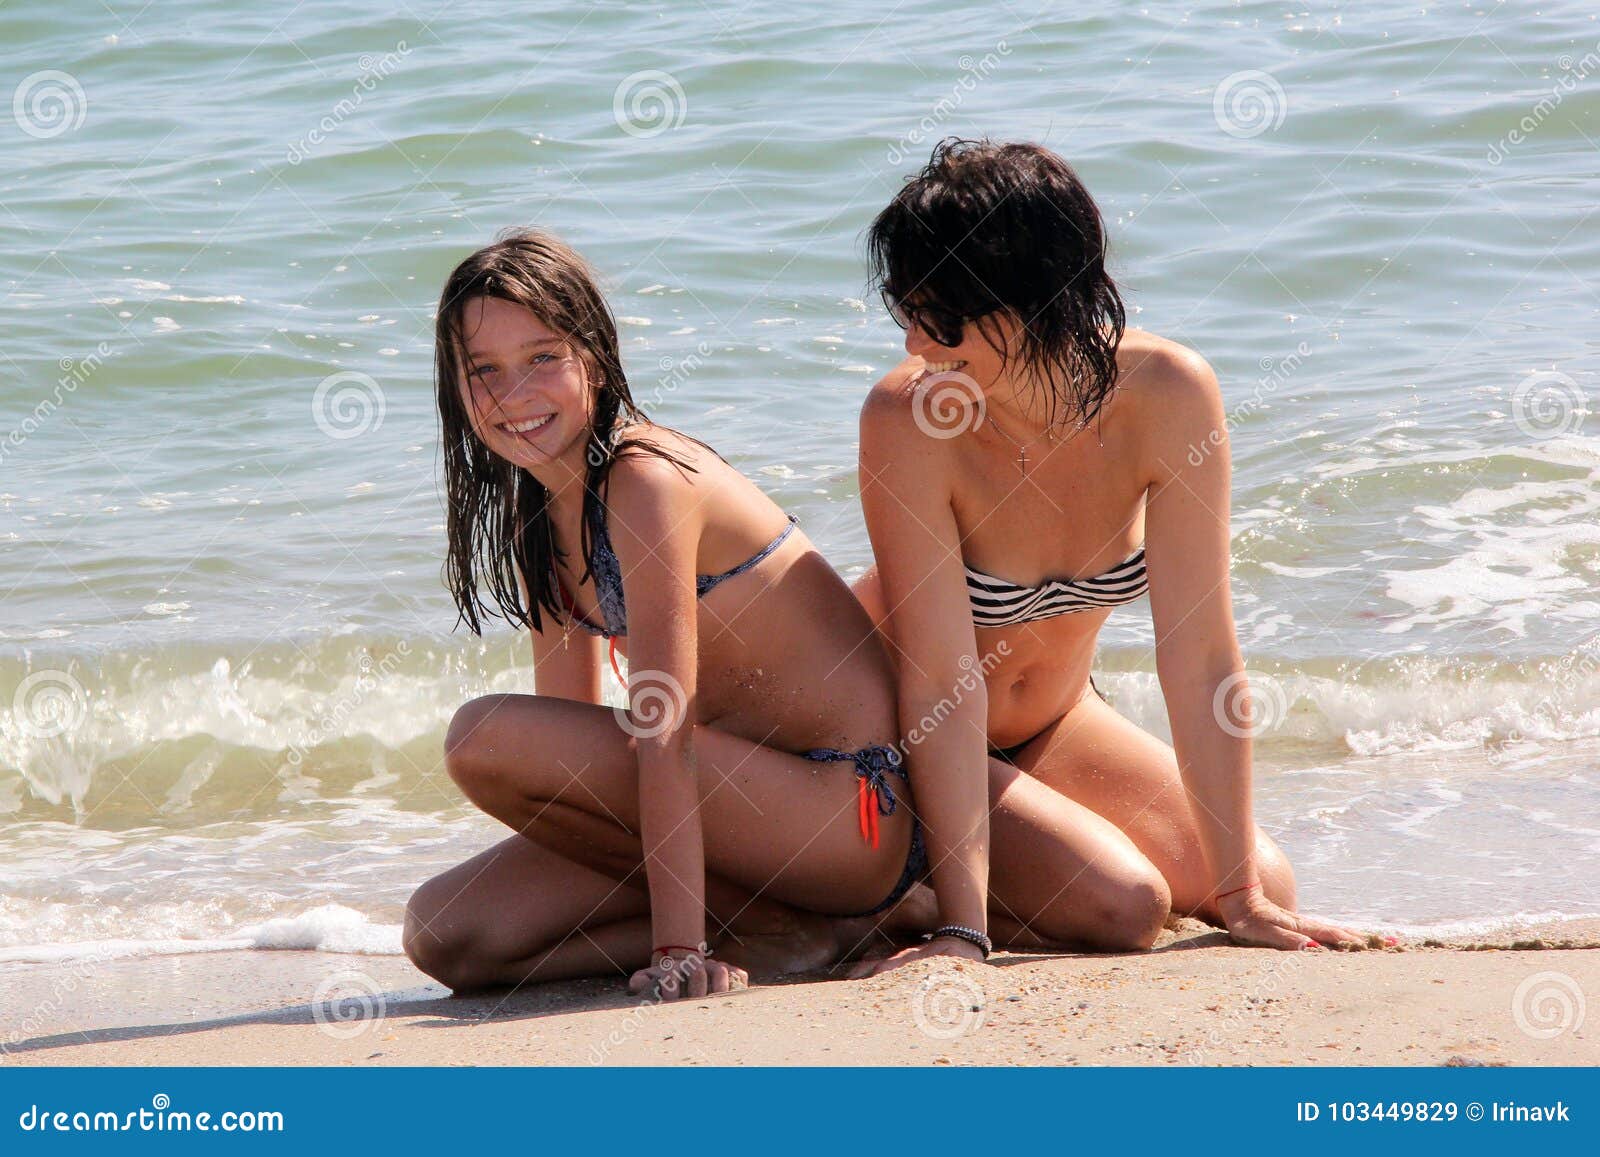 Best of Mom and daughter nudism